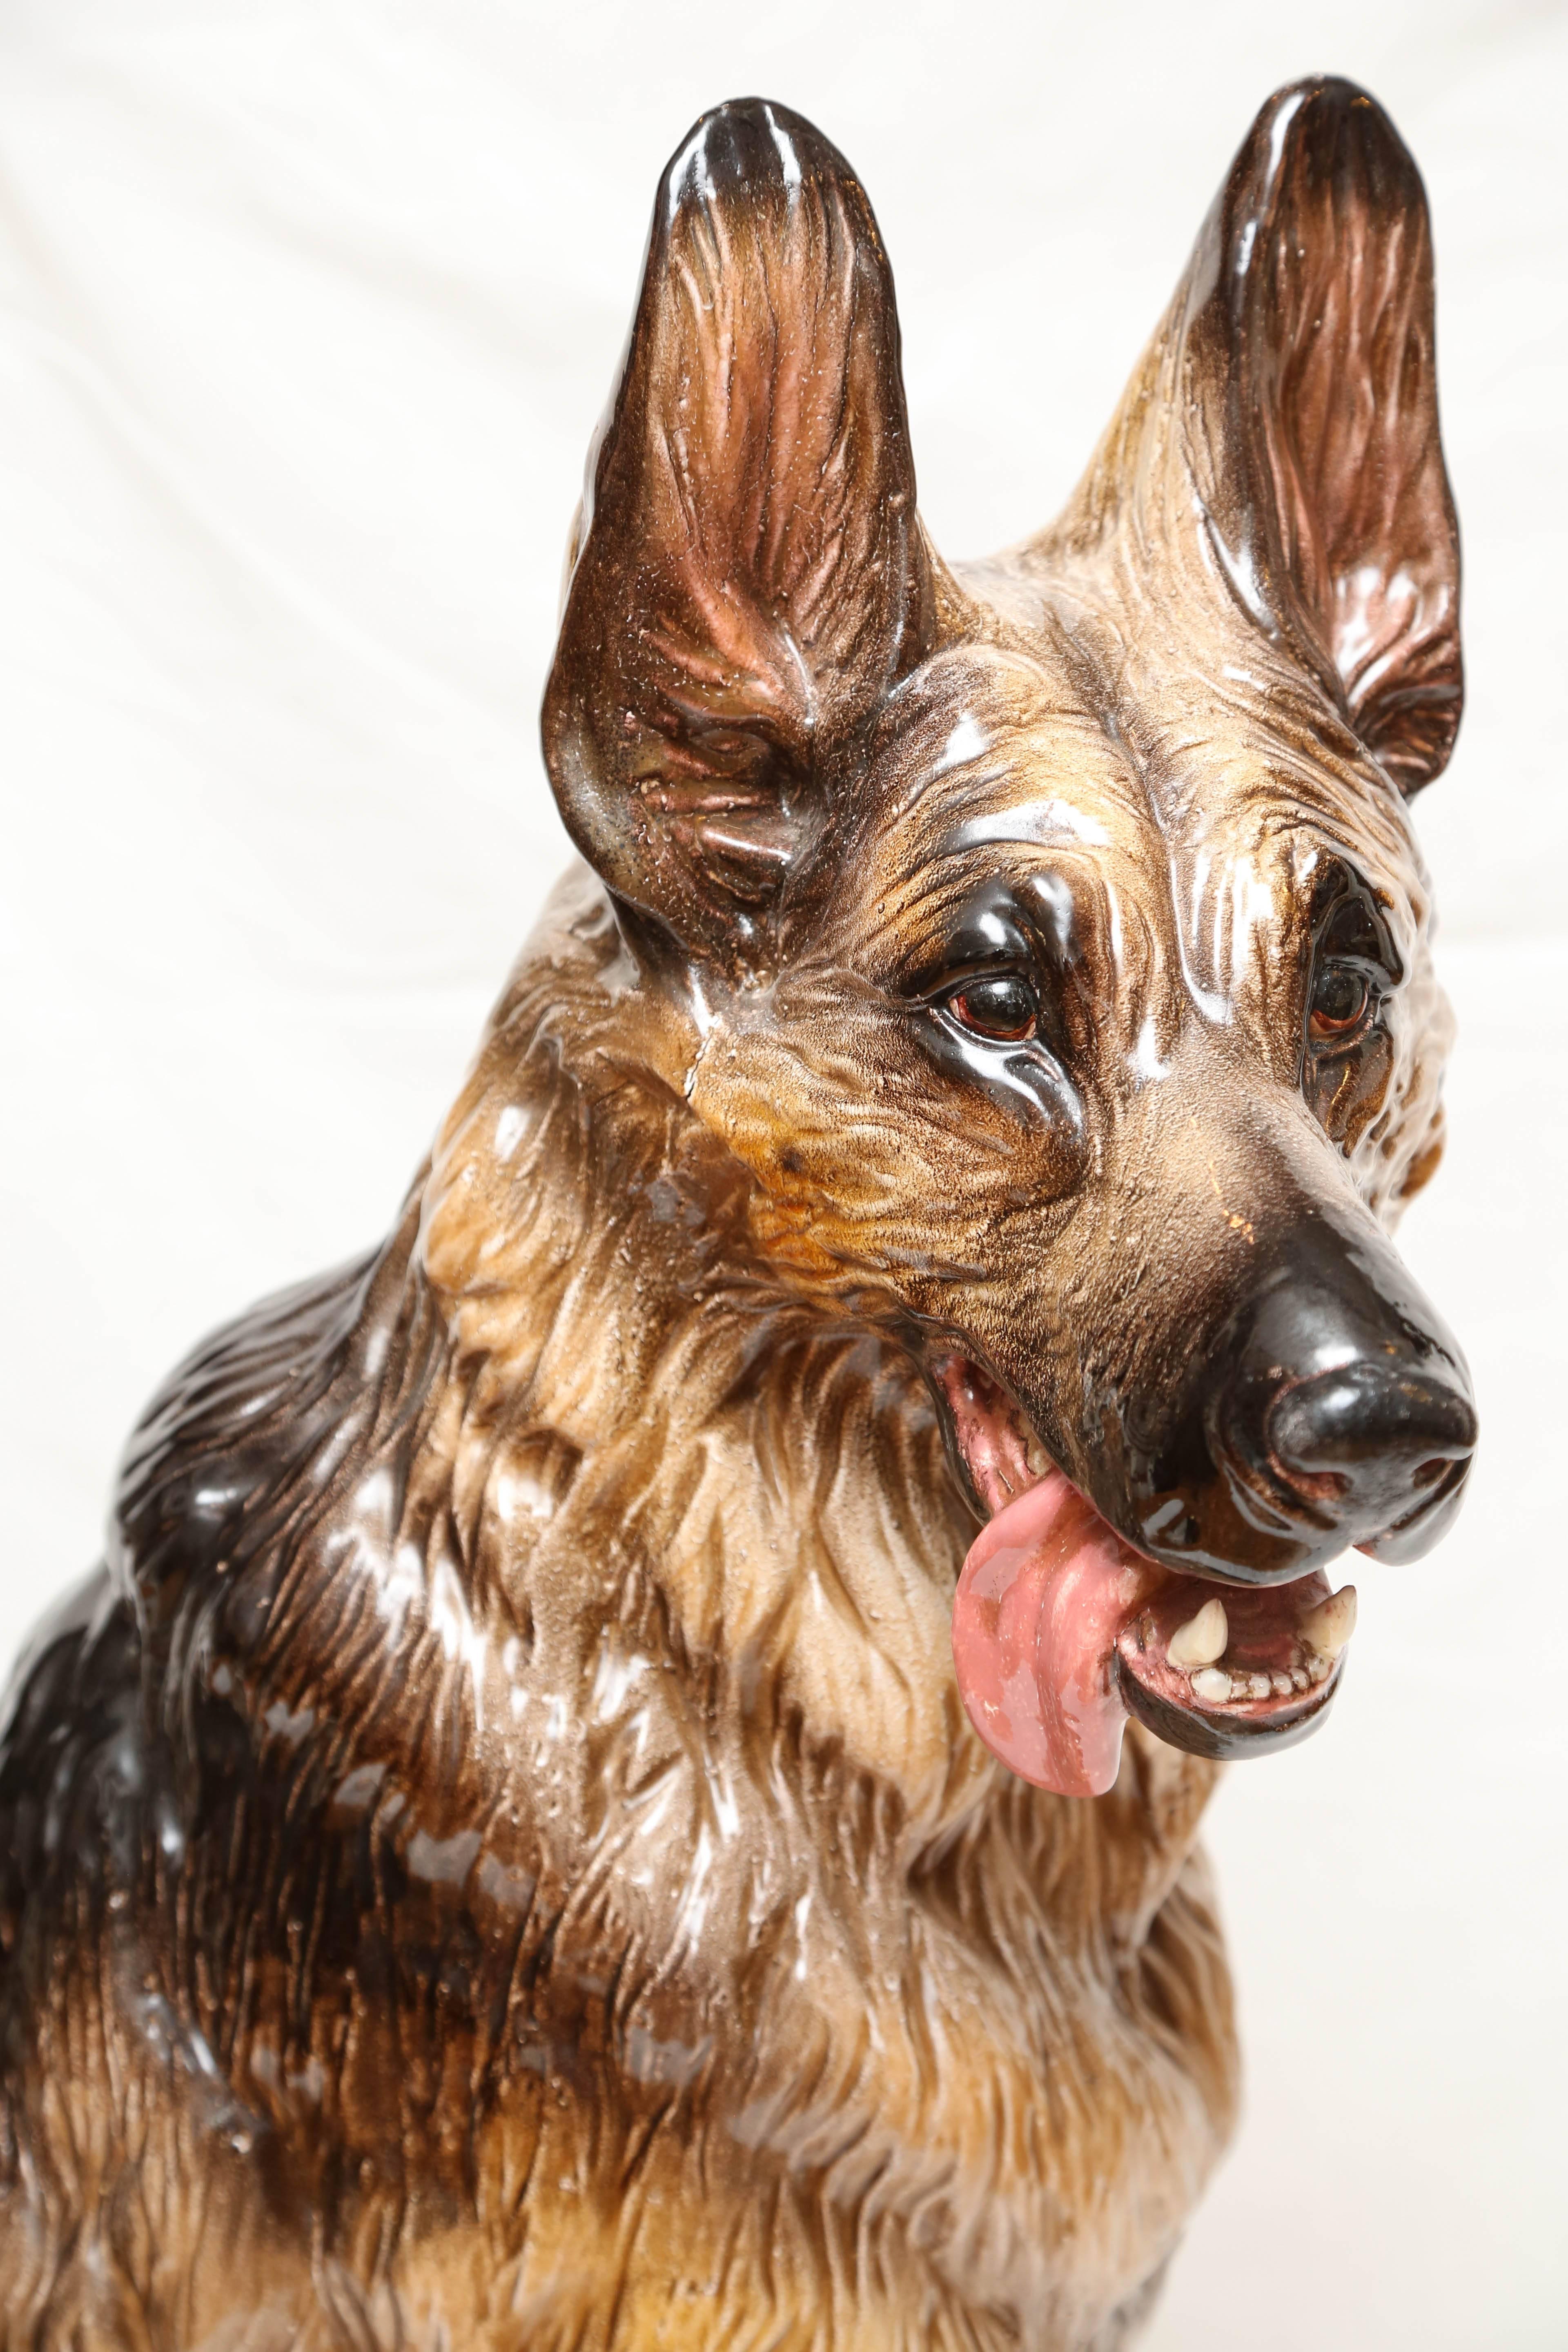 A superbly detailed and realistic figure of the Alsatian dog.